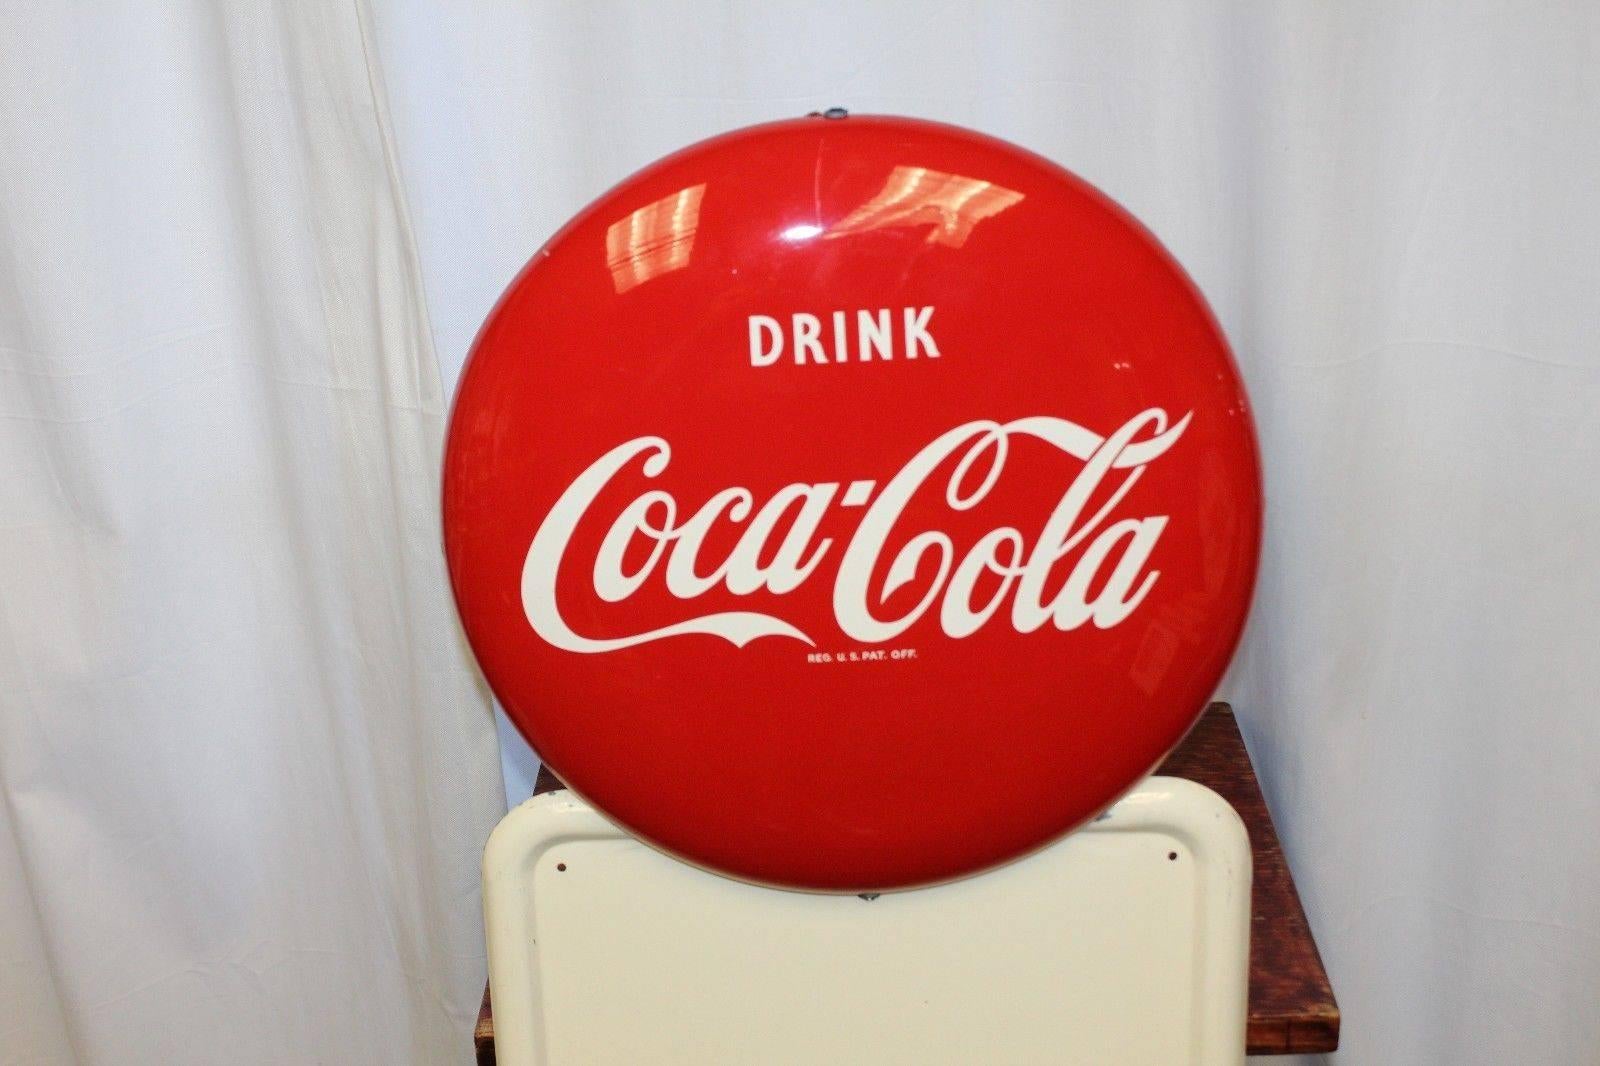 Original Coca Cola advertising made by AM Co. The Allen-Morrison Corporation who was best known for making the now iconic metal Coca-Cola signs. Allen-Morrison grew to become one of the largest sign manufacturers in North America. This is one of the